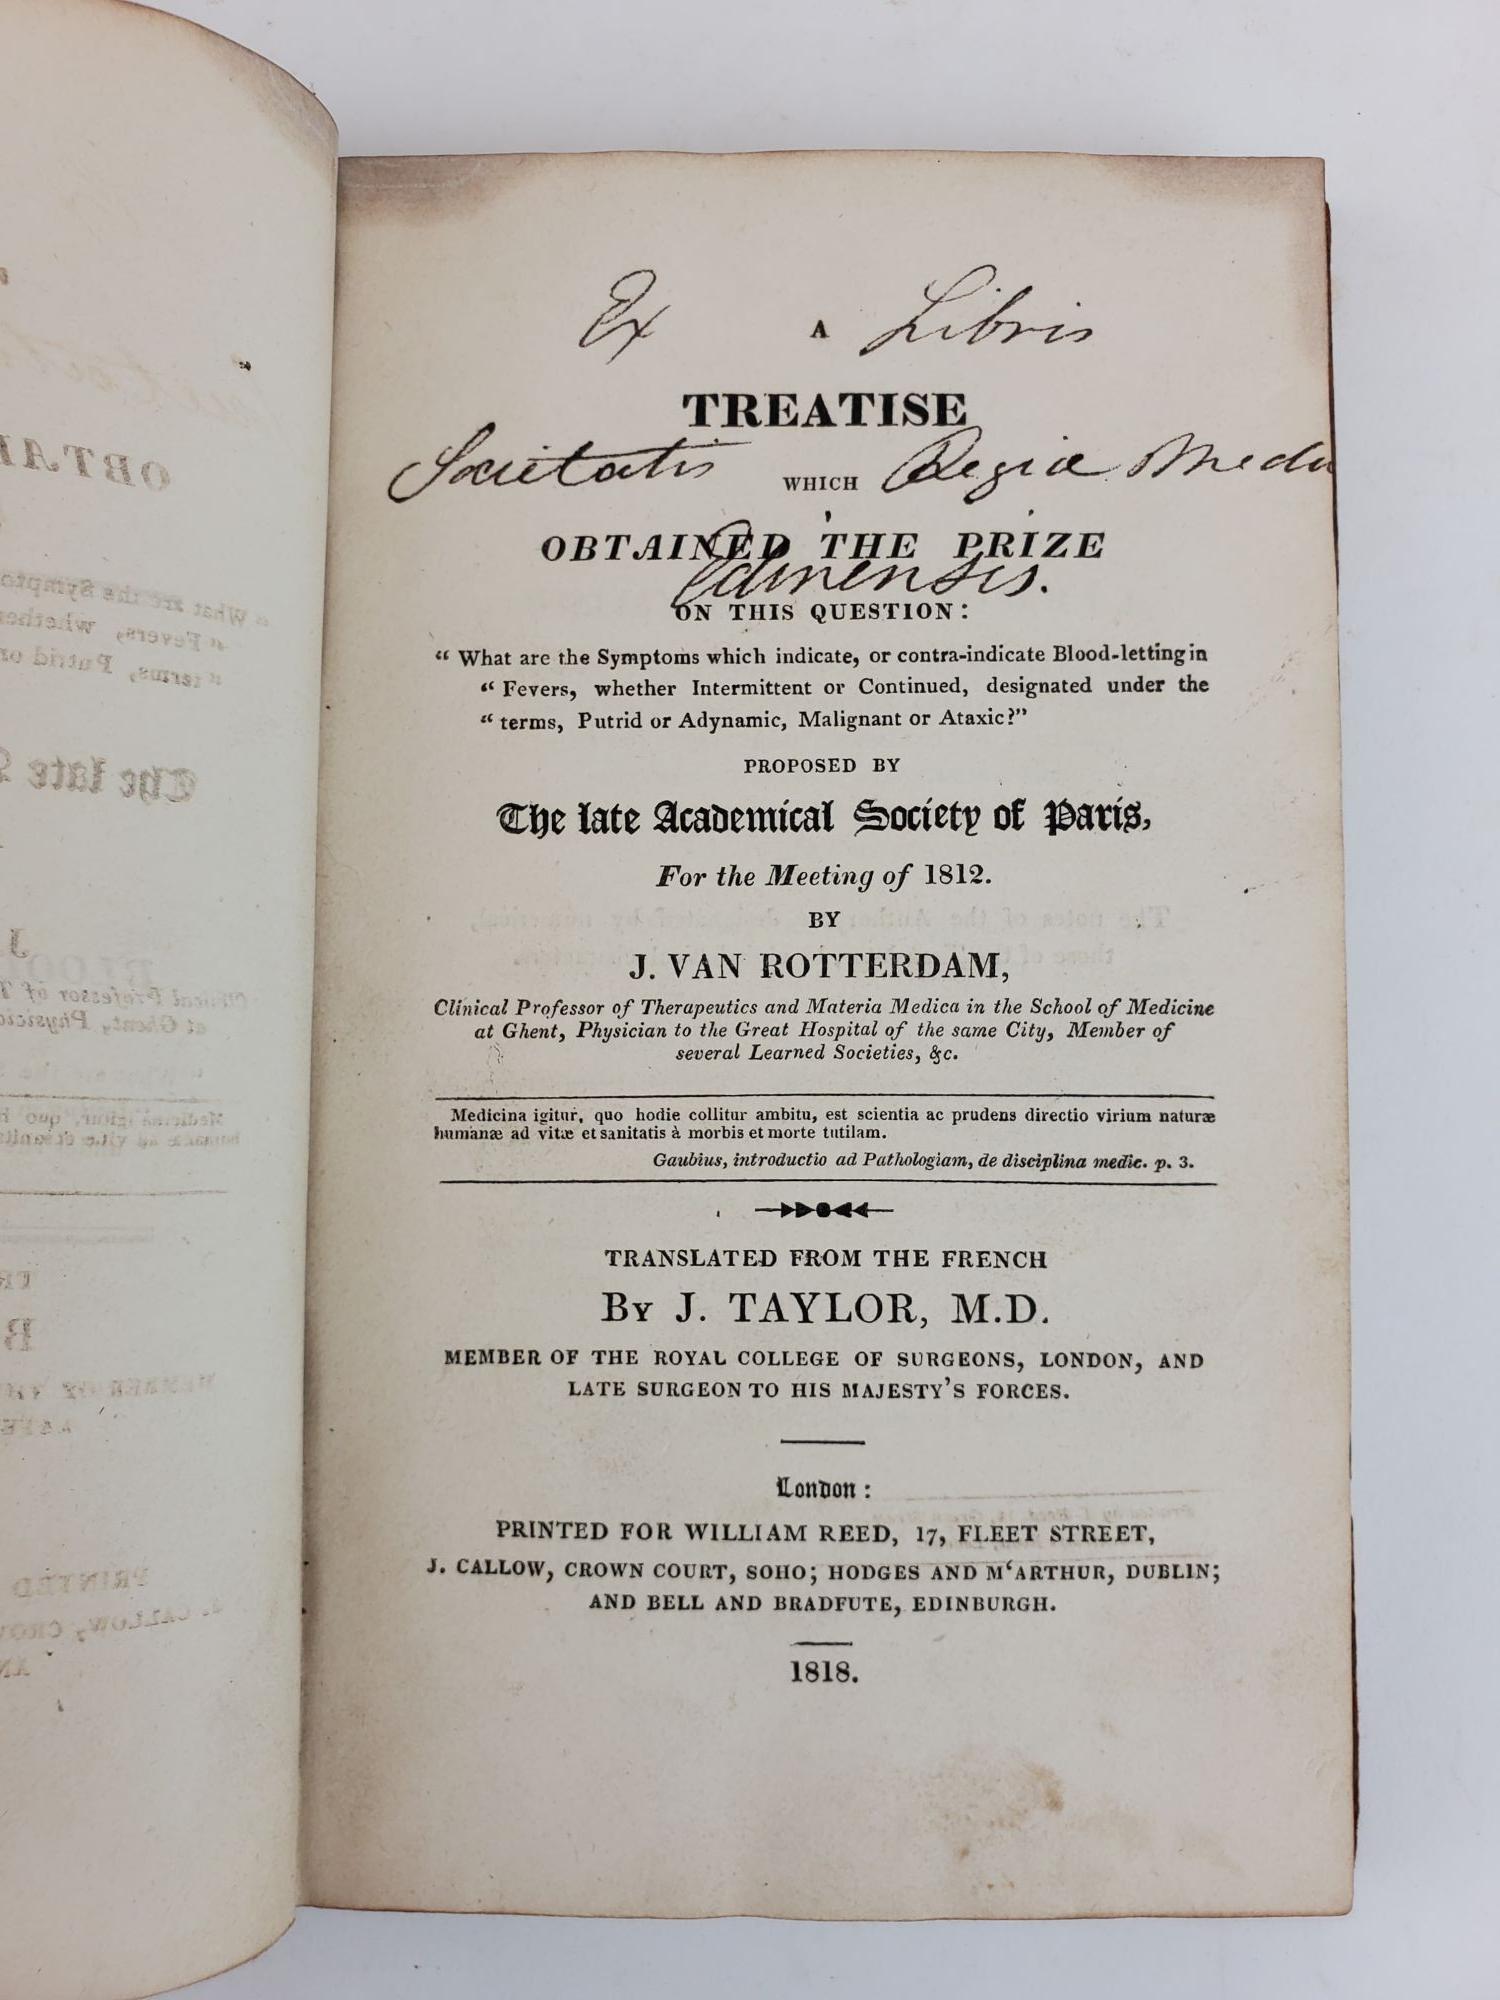 Product Image for A TREATISE WHICH OBTAINED THE PRIZE ON THIS QUESTION: "WHAT ARE THE SYMPTOMS WHICH INDICATE, OR CONTRA-INDICATE BLOOD-LETTING IN FEVERS, WHETHER INTERMITTENT OR CONTINUED, DESIGNATED UNDER THE TERMS, PUTRID OR ADYNAMIC, MALIGNANT OR ATAXIC?"